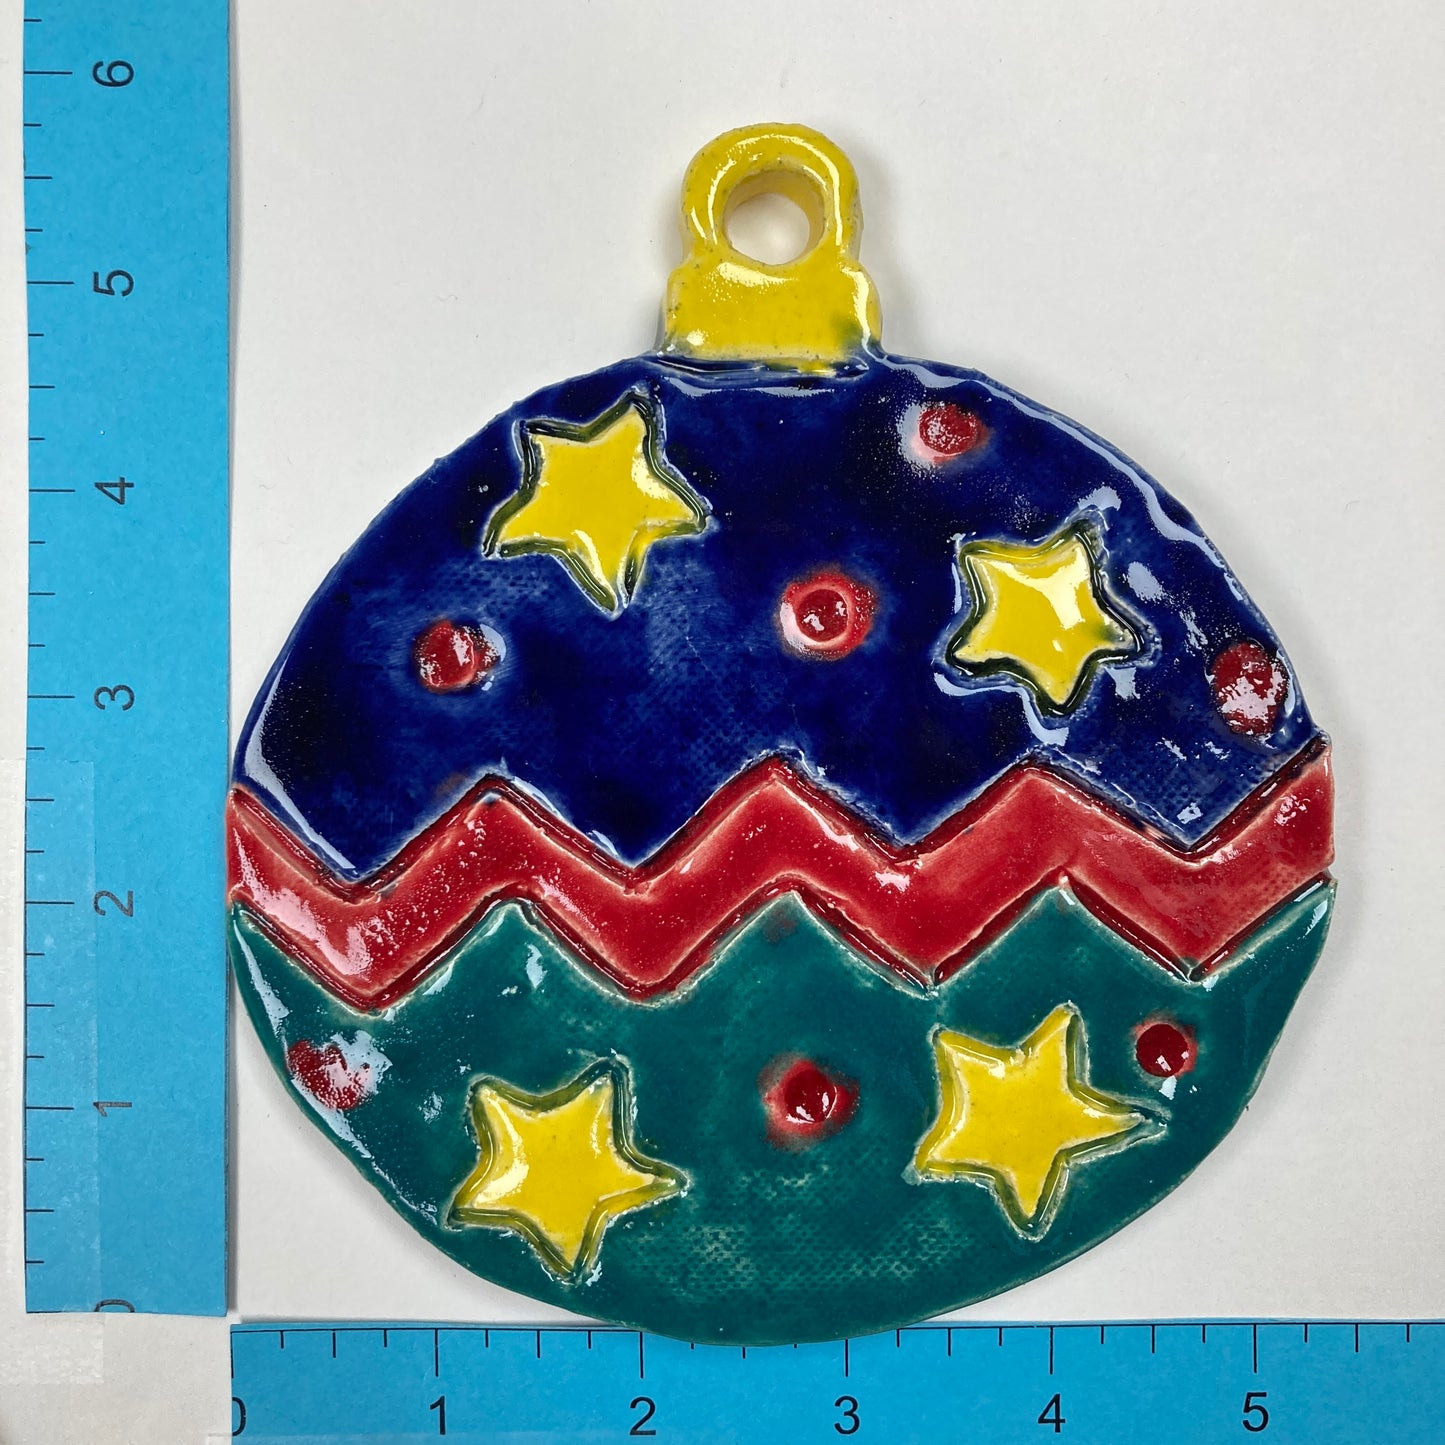 WATCH Resources Art Guild - Ceramic Arts Handmade Clay Crafts 6-inch x 5.5-inch Glazed Christmas Ornament made by Lisa Uptain